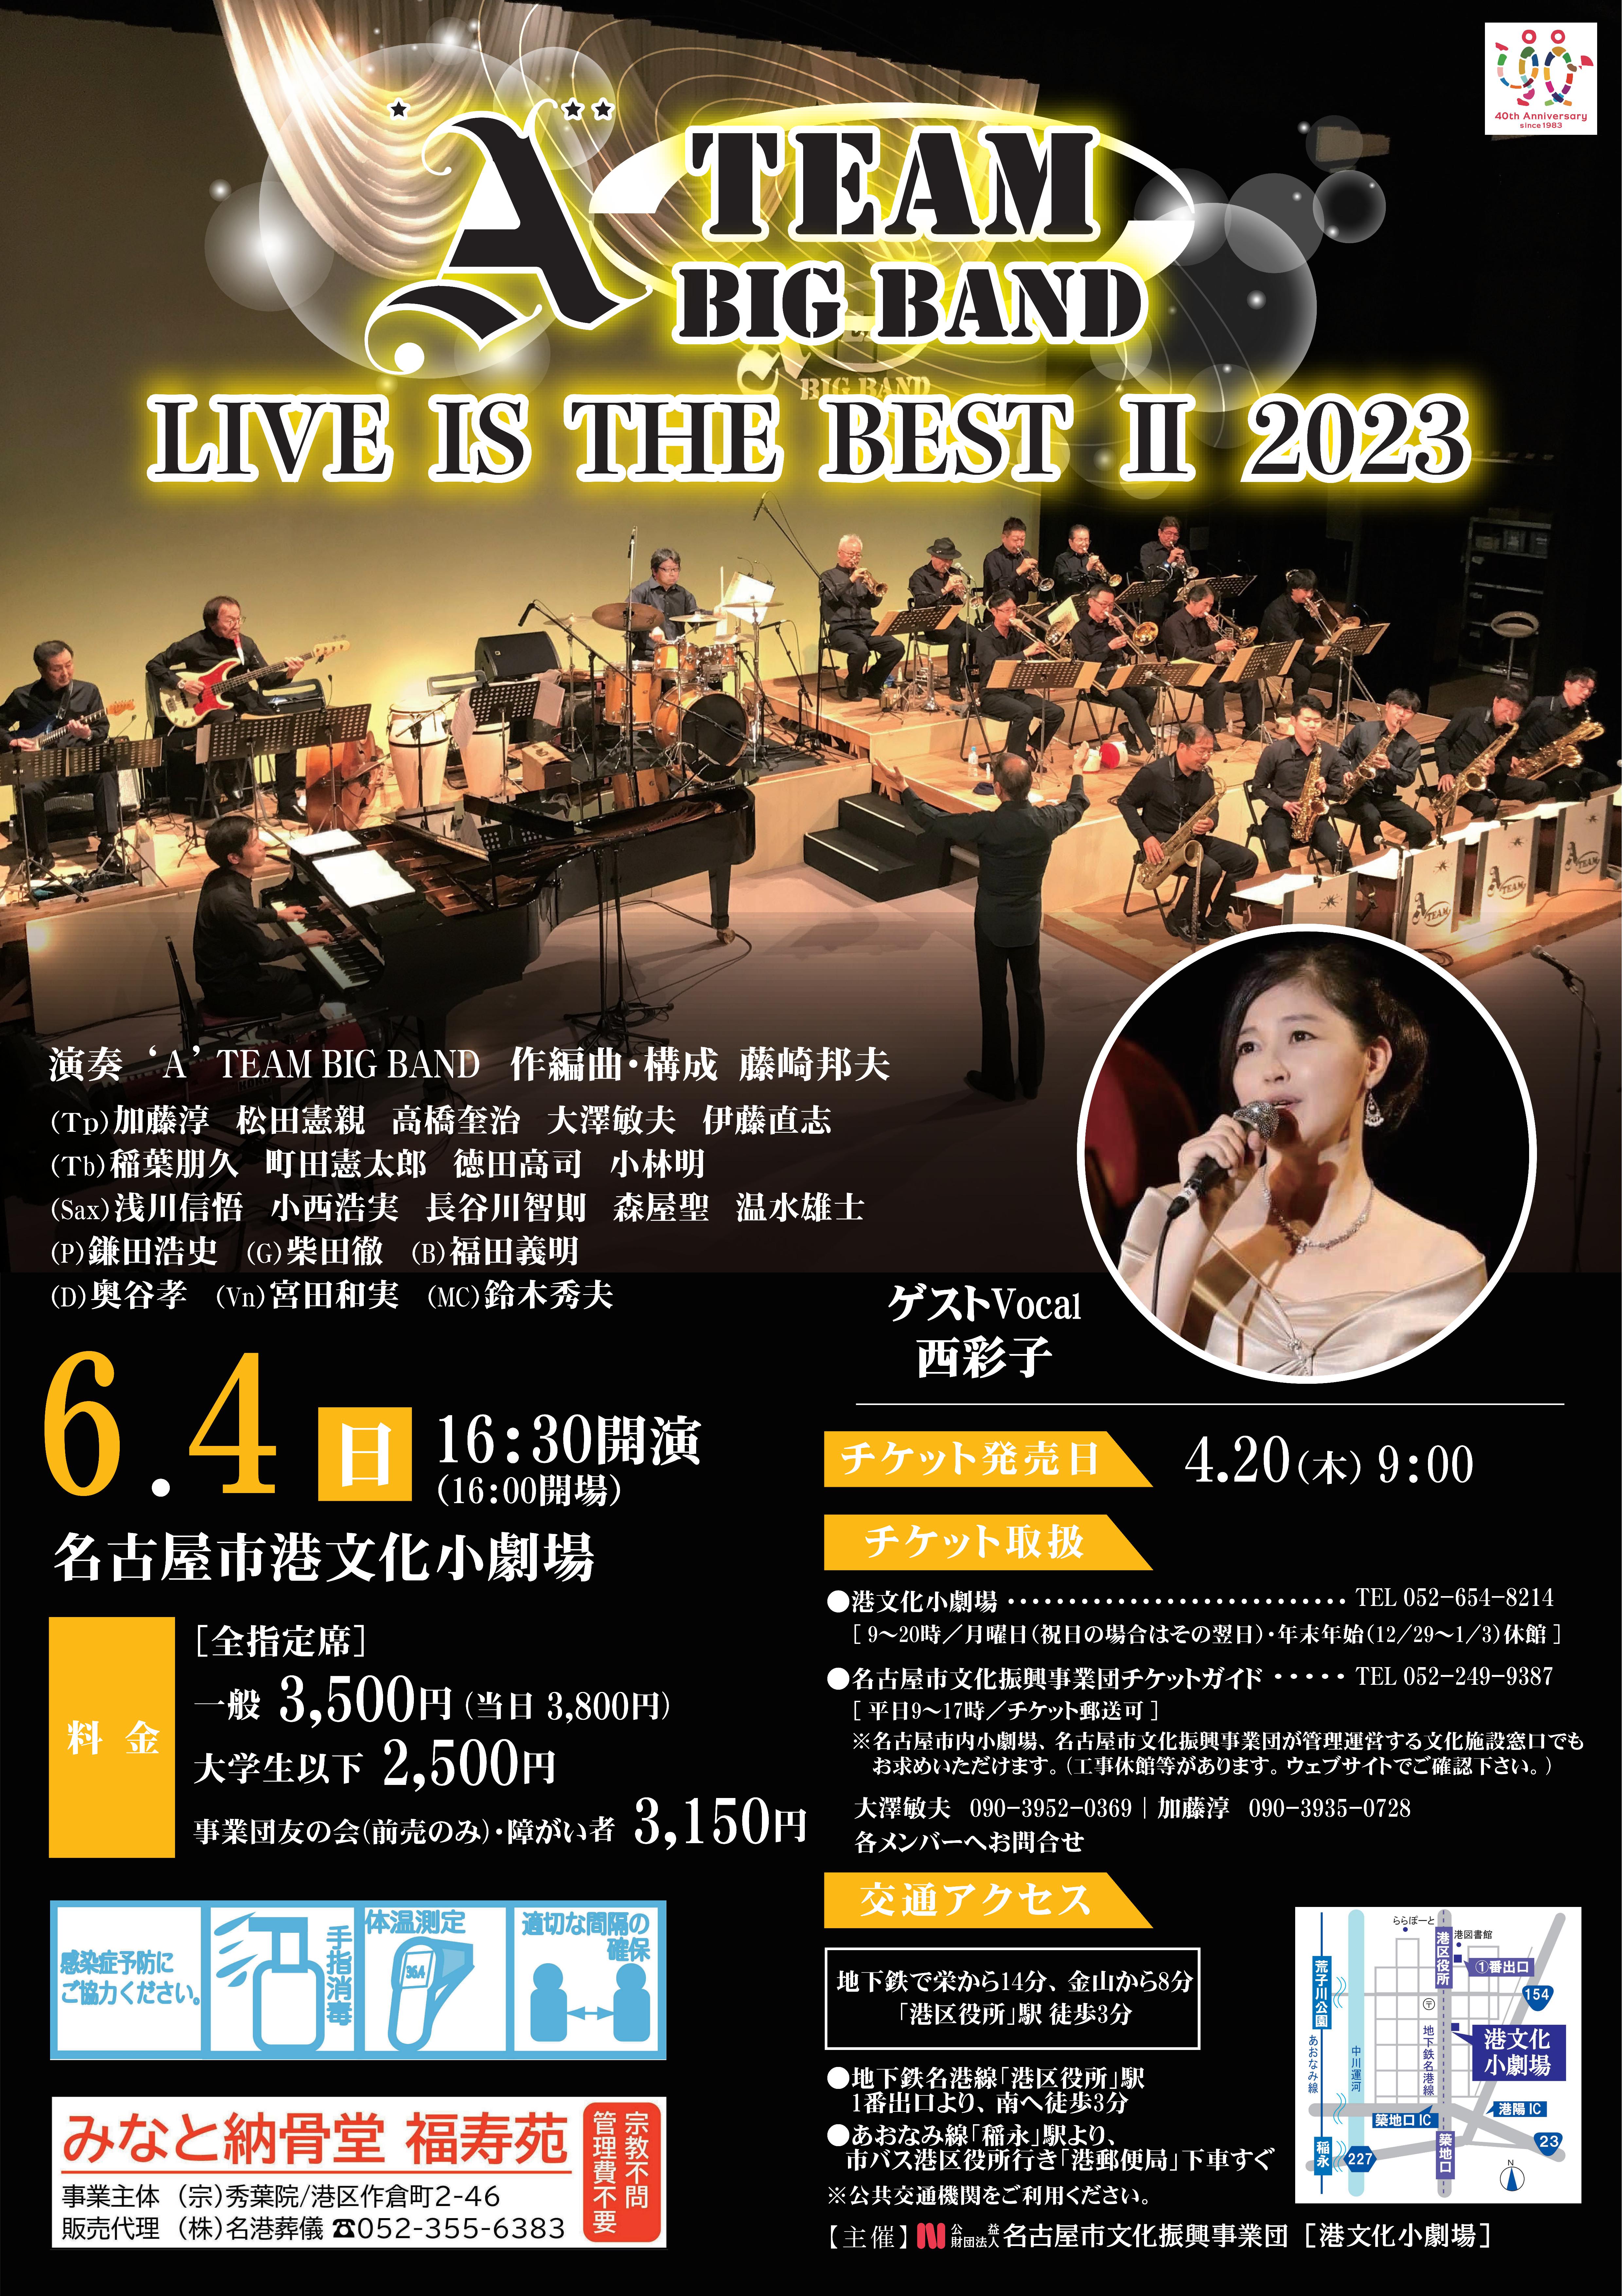 'A'TEAM BIG BAND  LIVE IS THE BEST Ⅱ 2023のチラシ